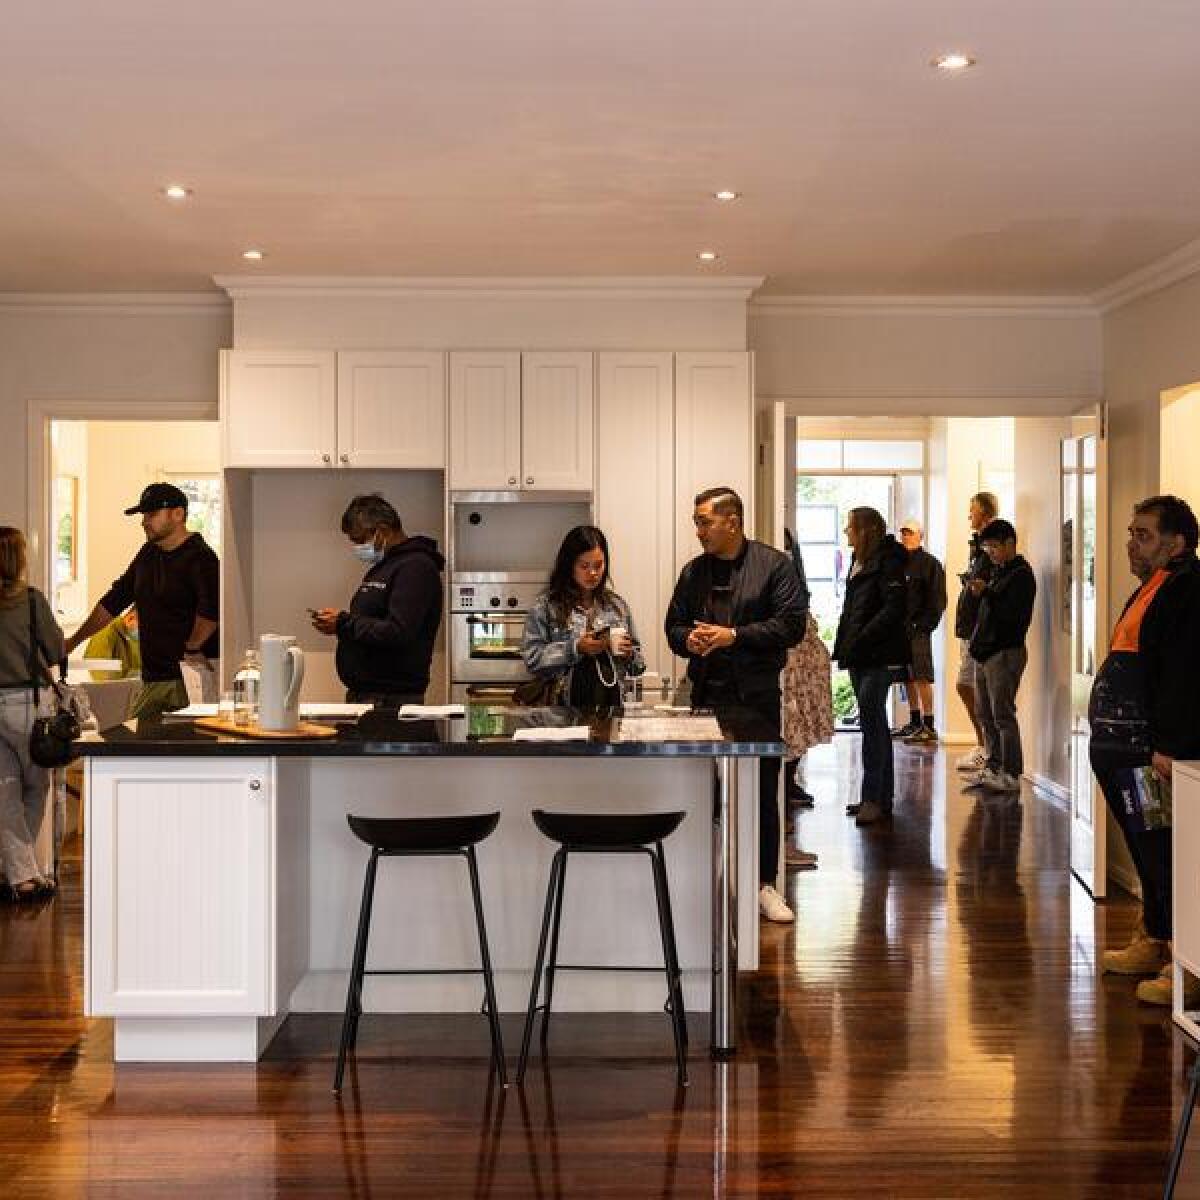 Bidders inside a home during an auction at Glen Iris in Melbourne